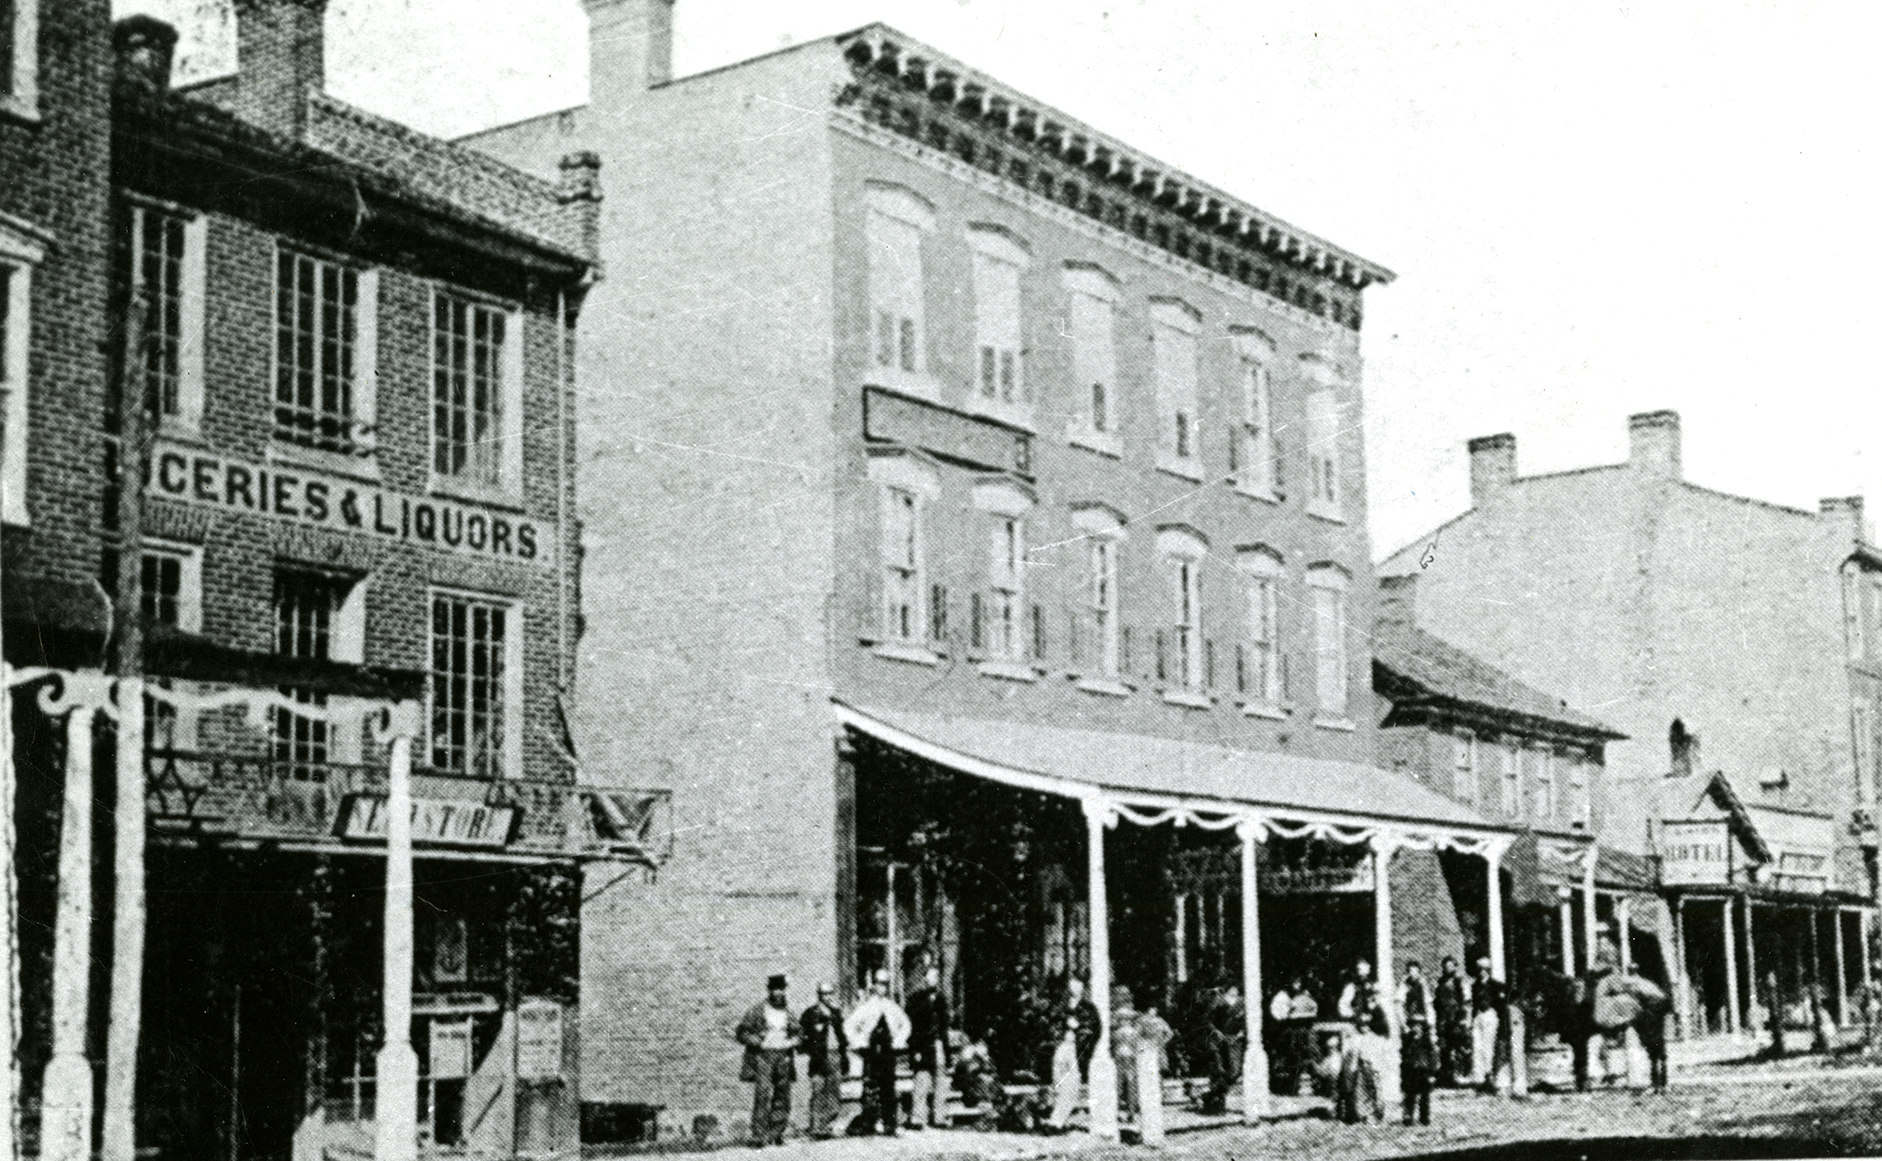 Black and white photograph of King Street, near Foundry Street, showing the Red Lion Inn Hotel and adjacent stores, ca. 1865